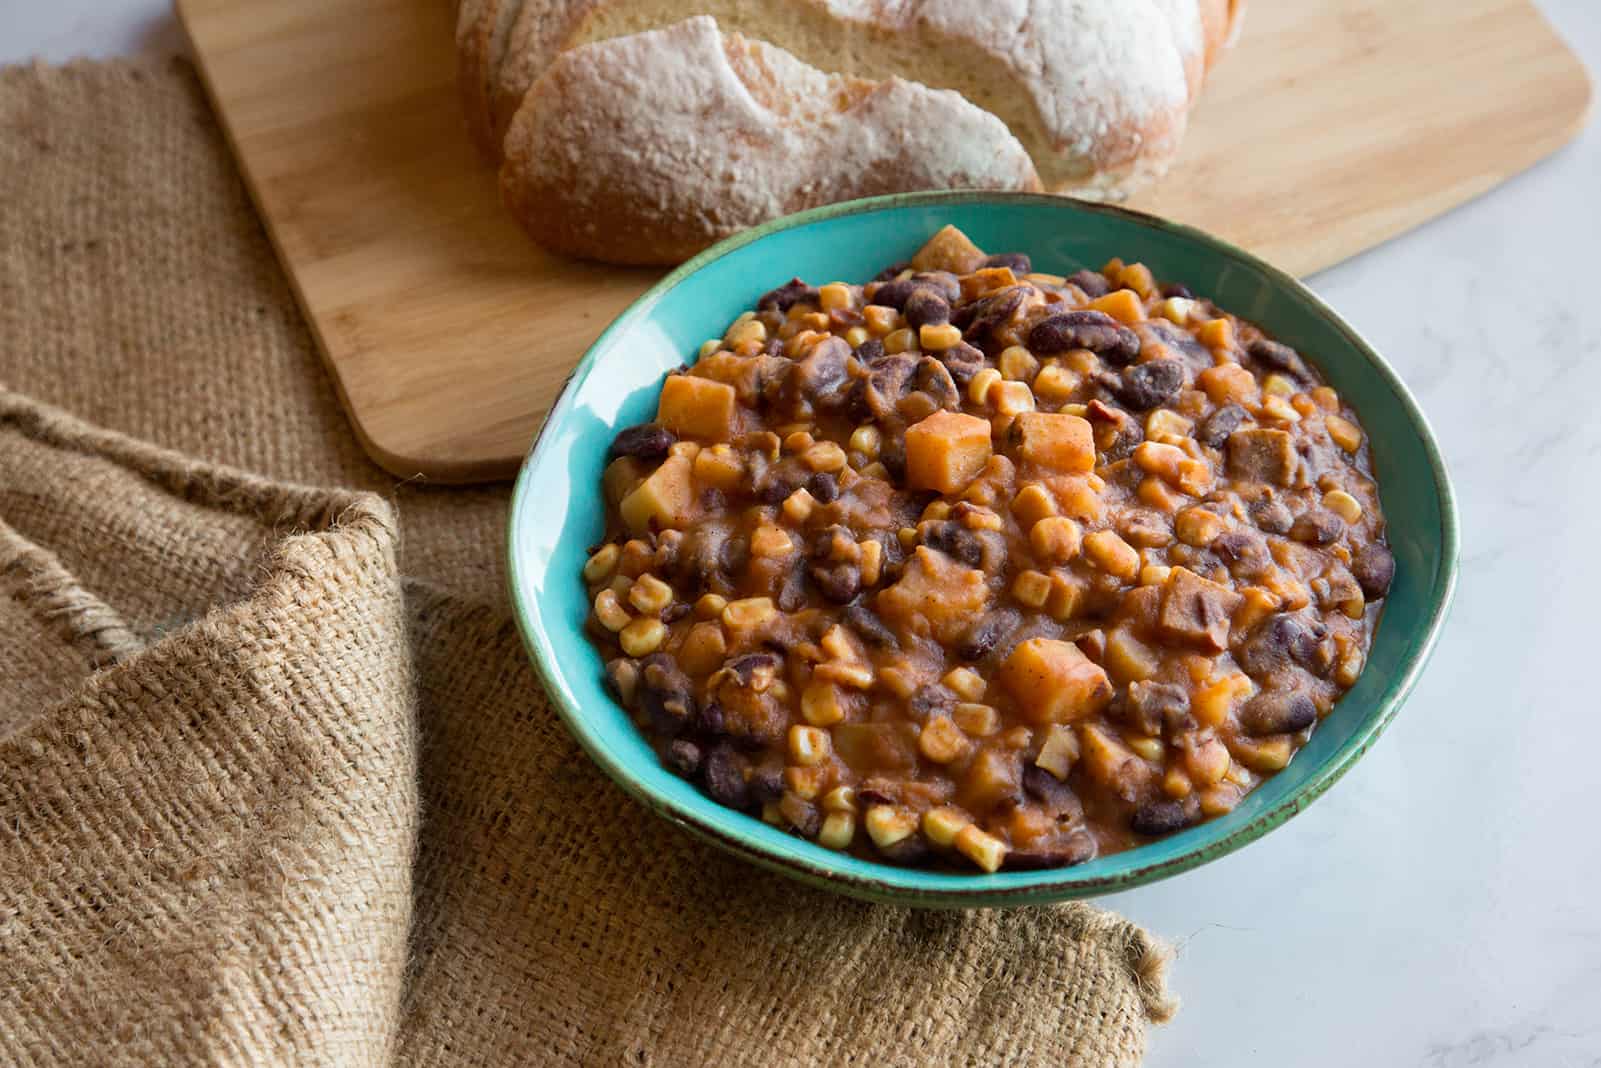 Githeri in a bowl with a loaf of bread